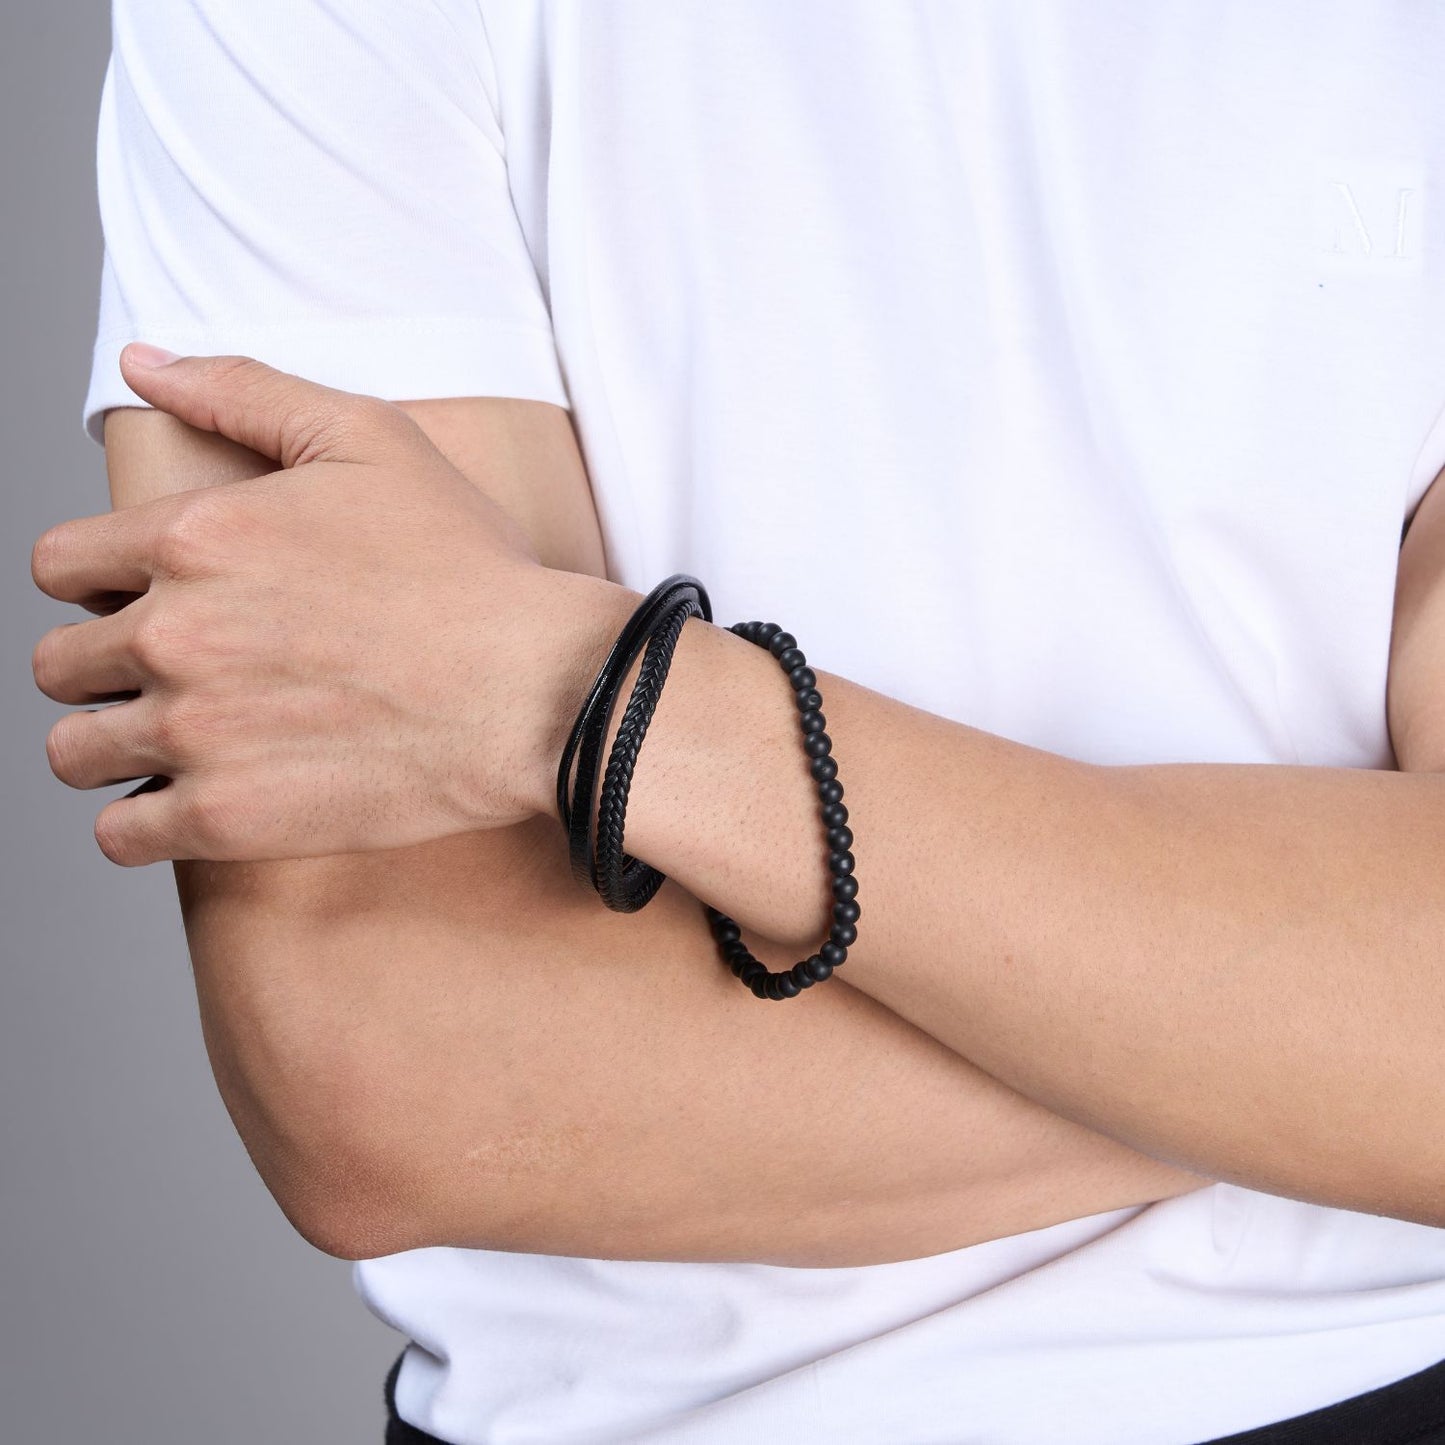 Black colored Multi-style durable Bracelet for men, with magnetic clasp.